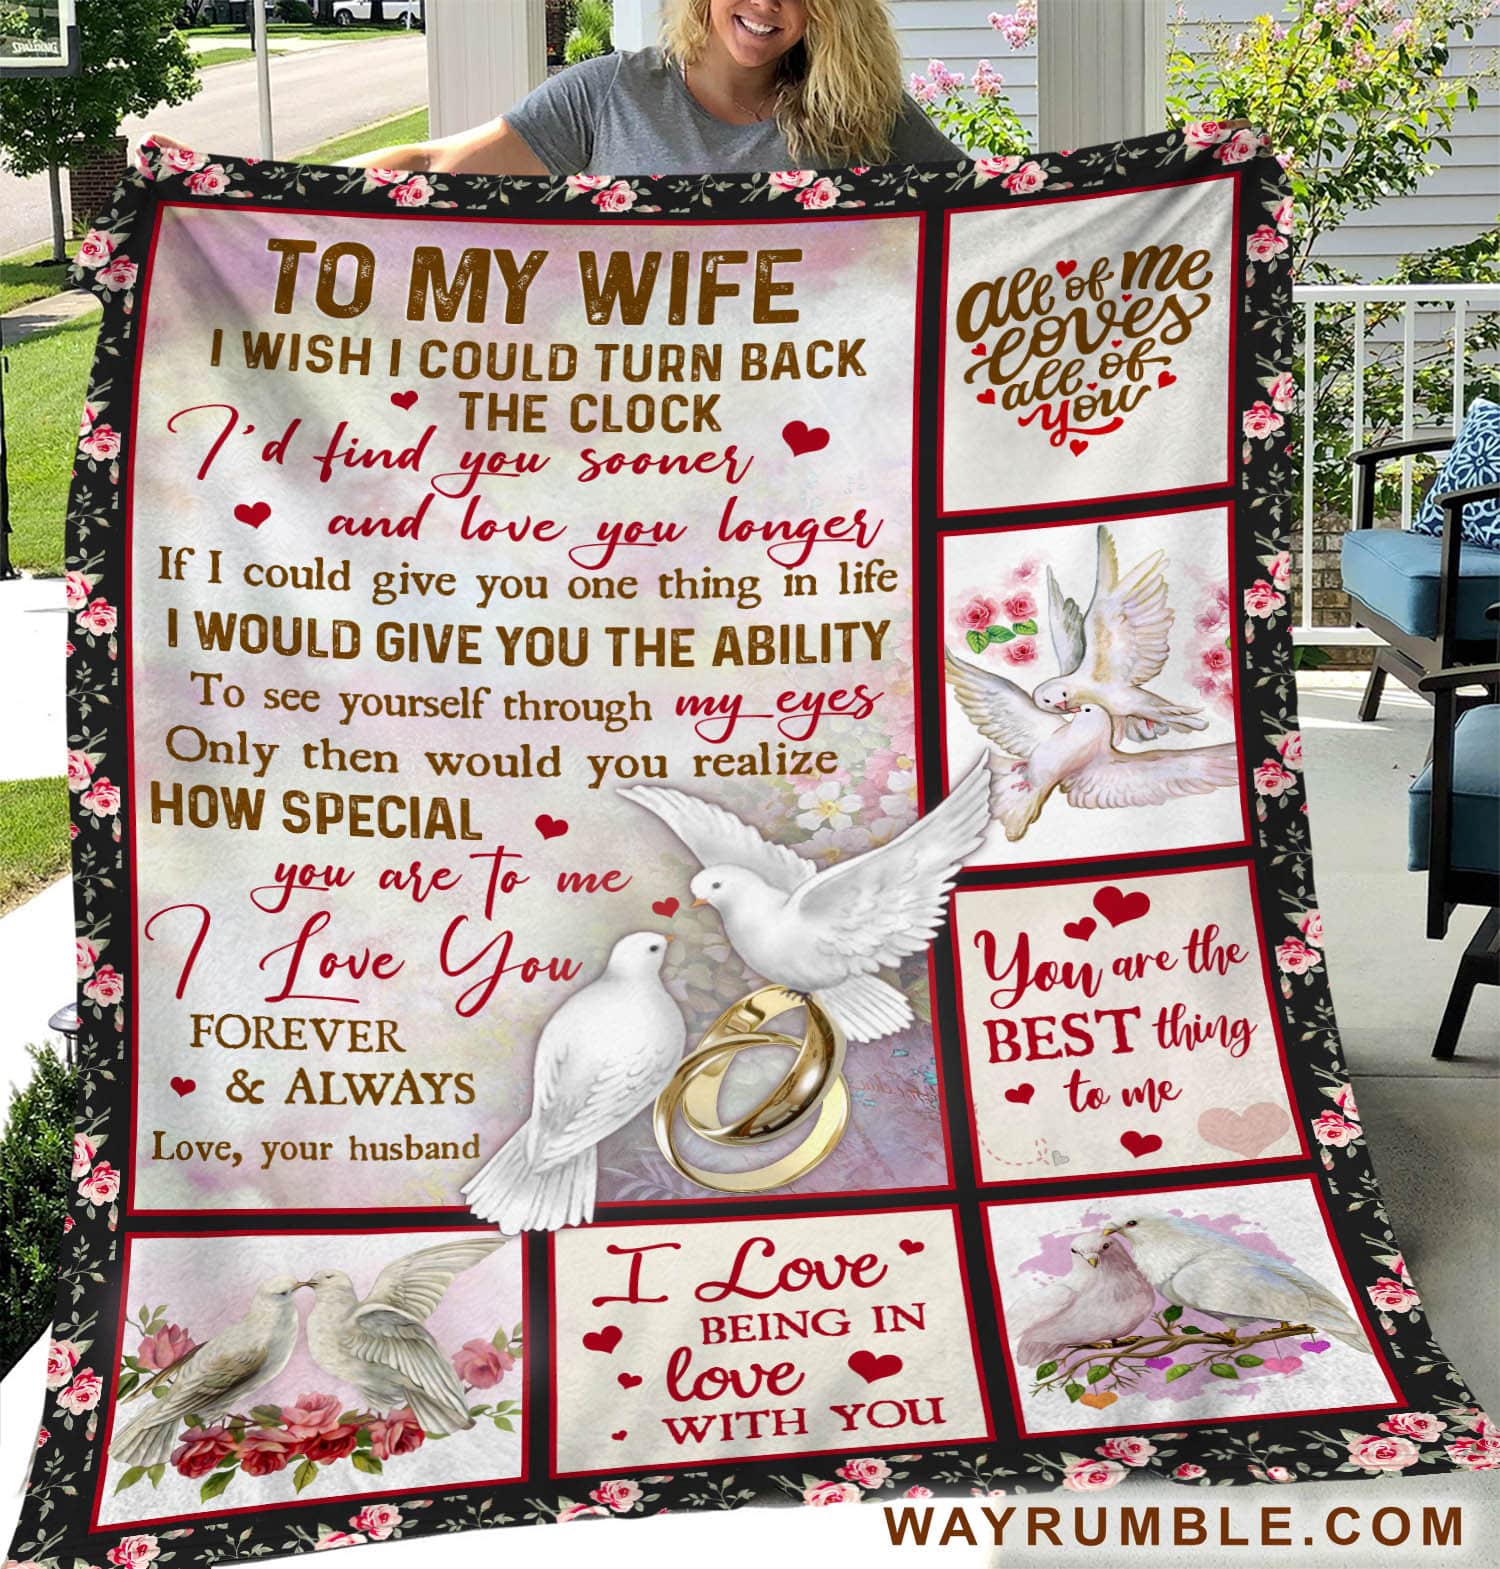 To My Wife, Doves Painting, Wedding Rings, You Are The Best Thing To Me – Couple Blanket